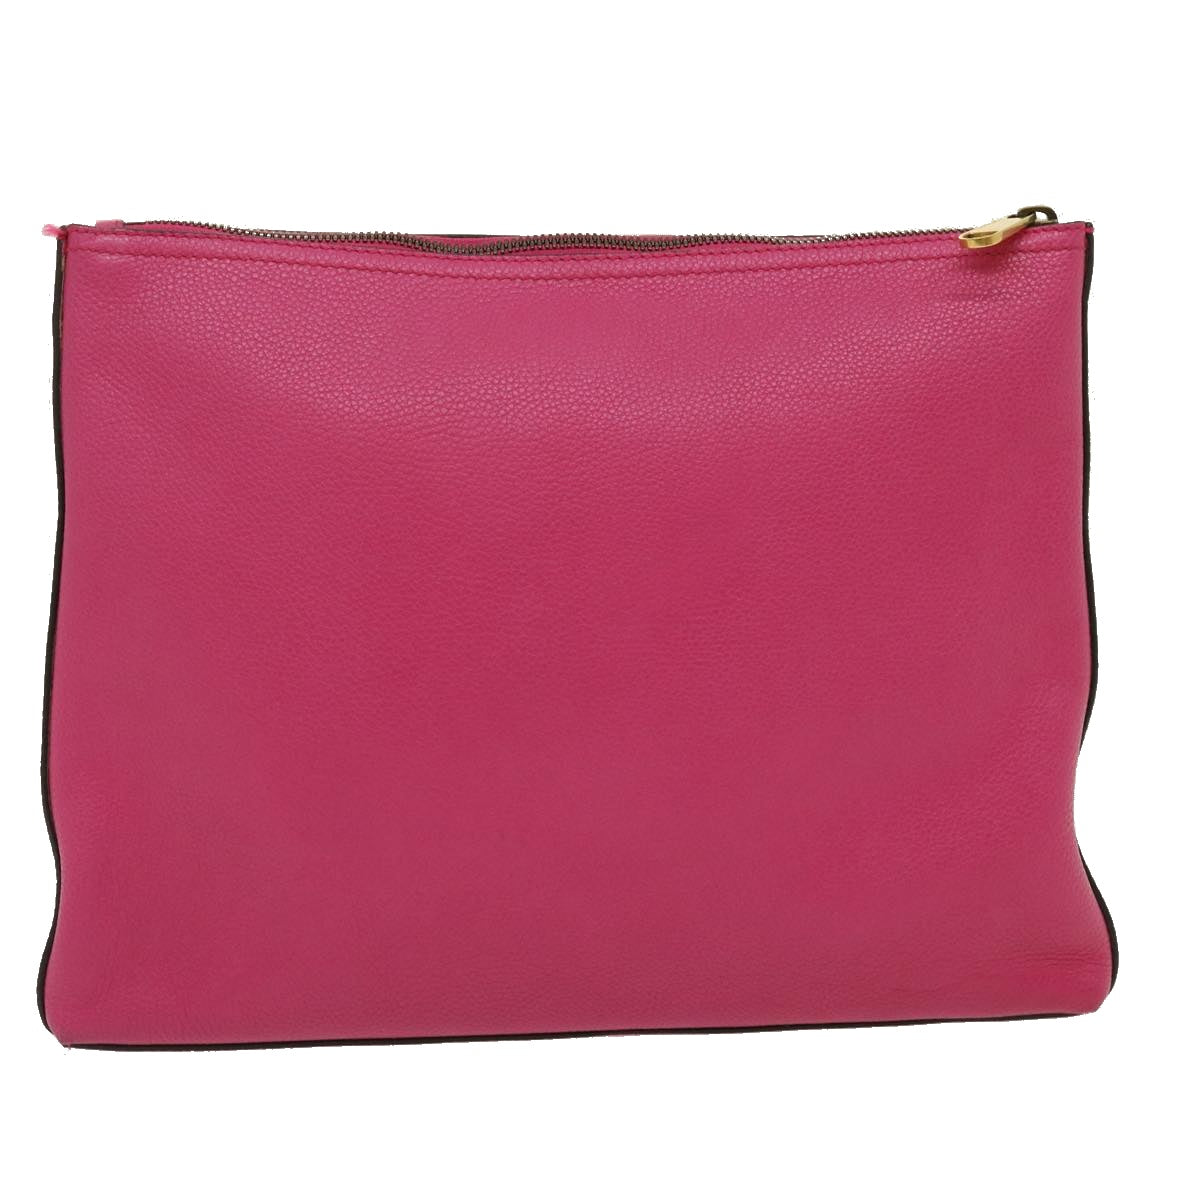 GUCCI Web Sherry Line Soho Clutch Bag Leather Pink Auth am2581g - 0